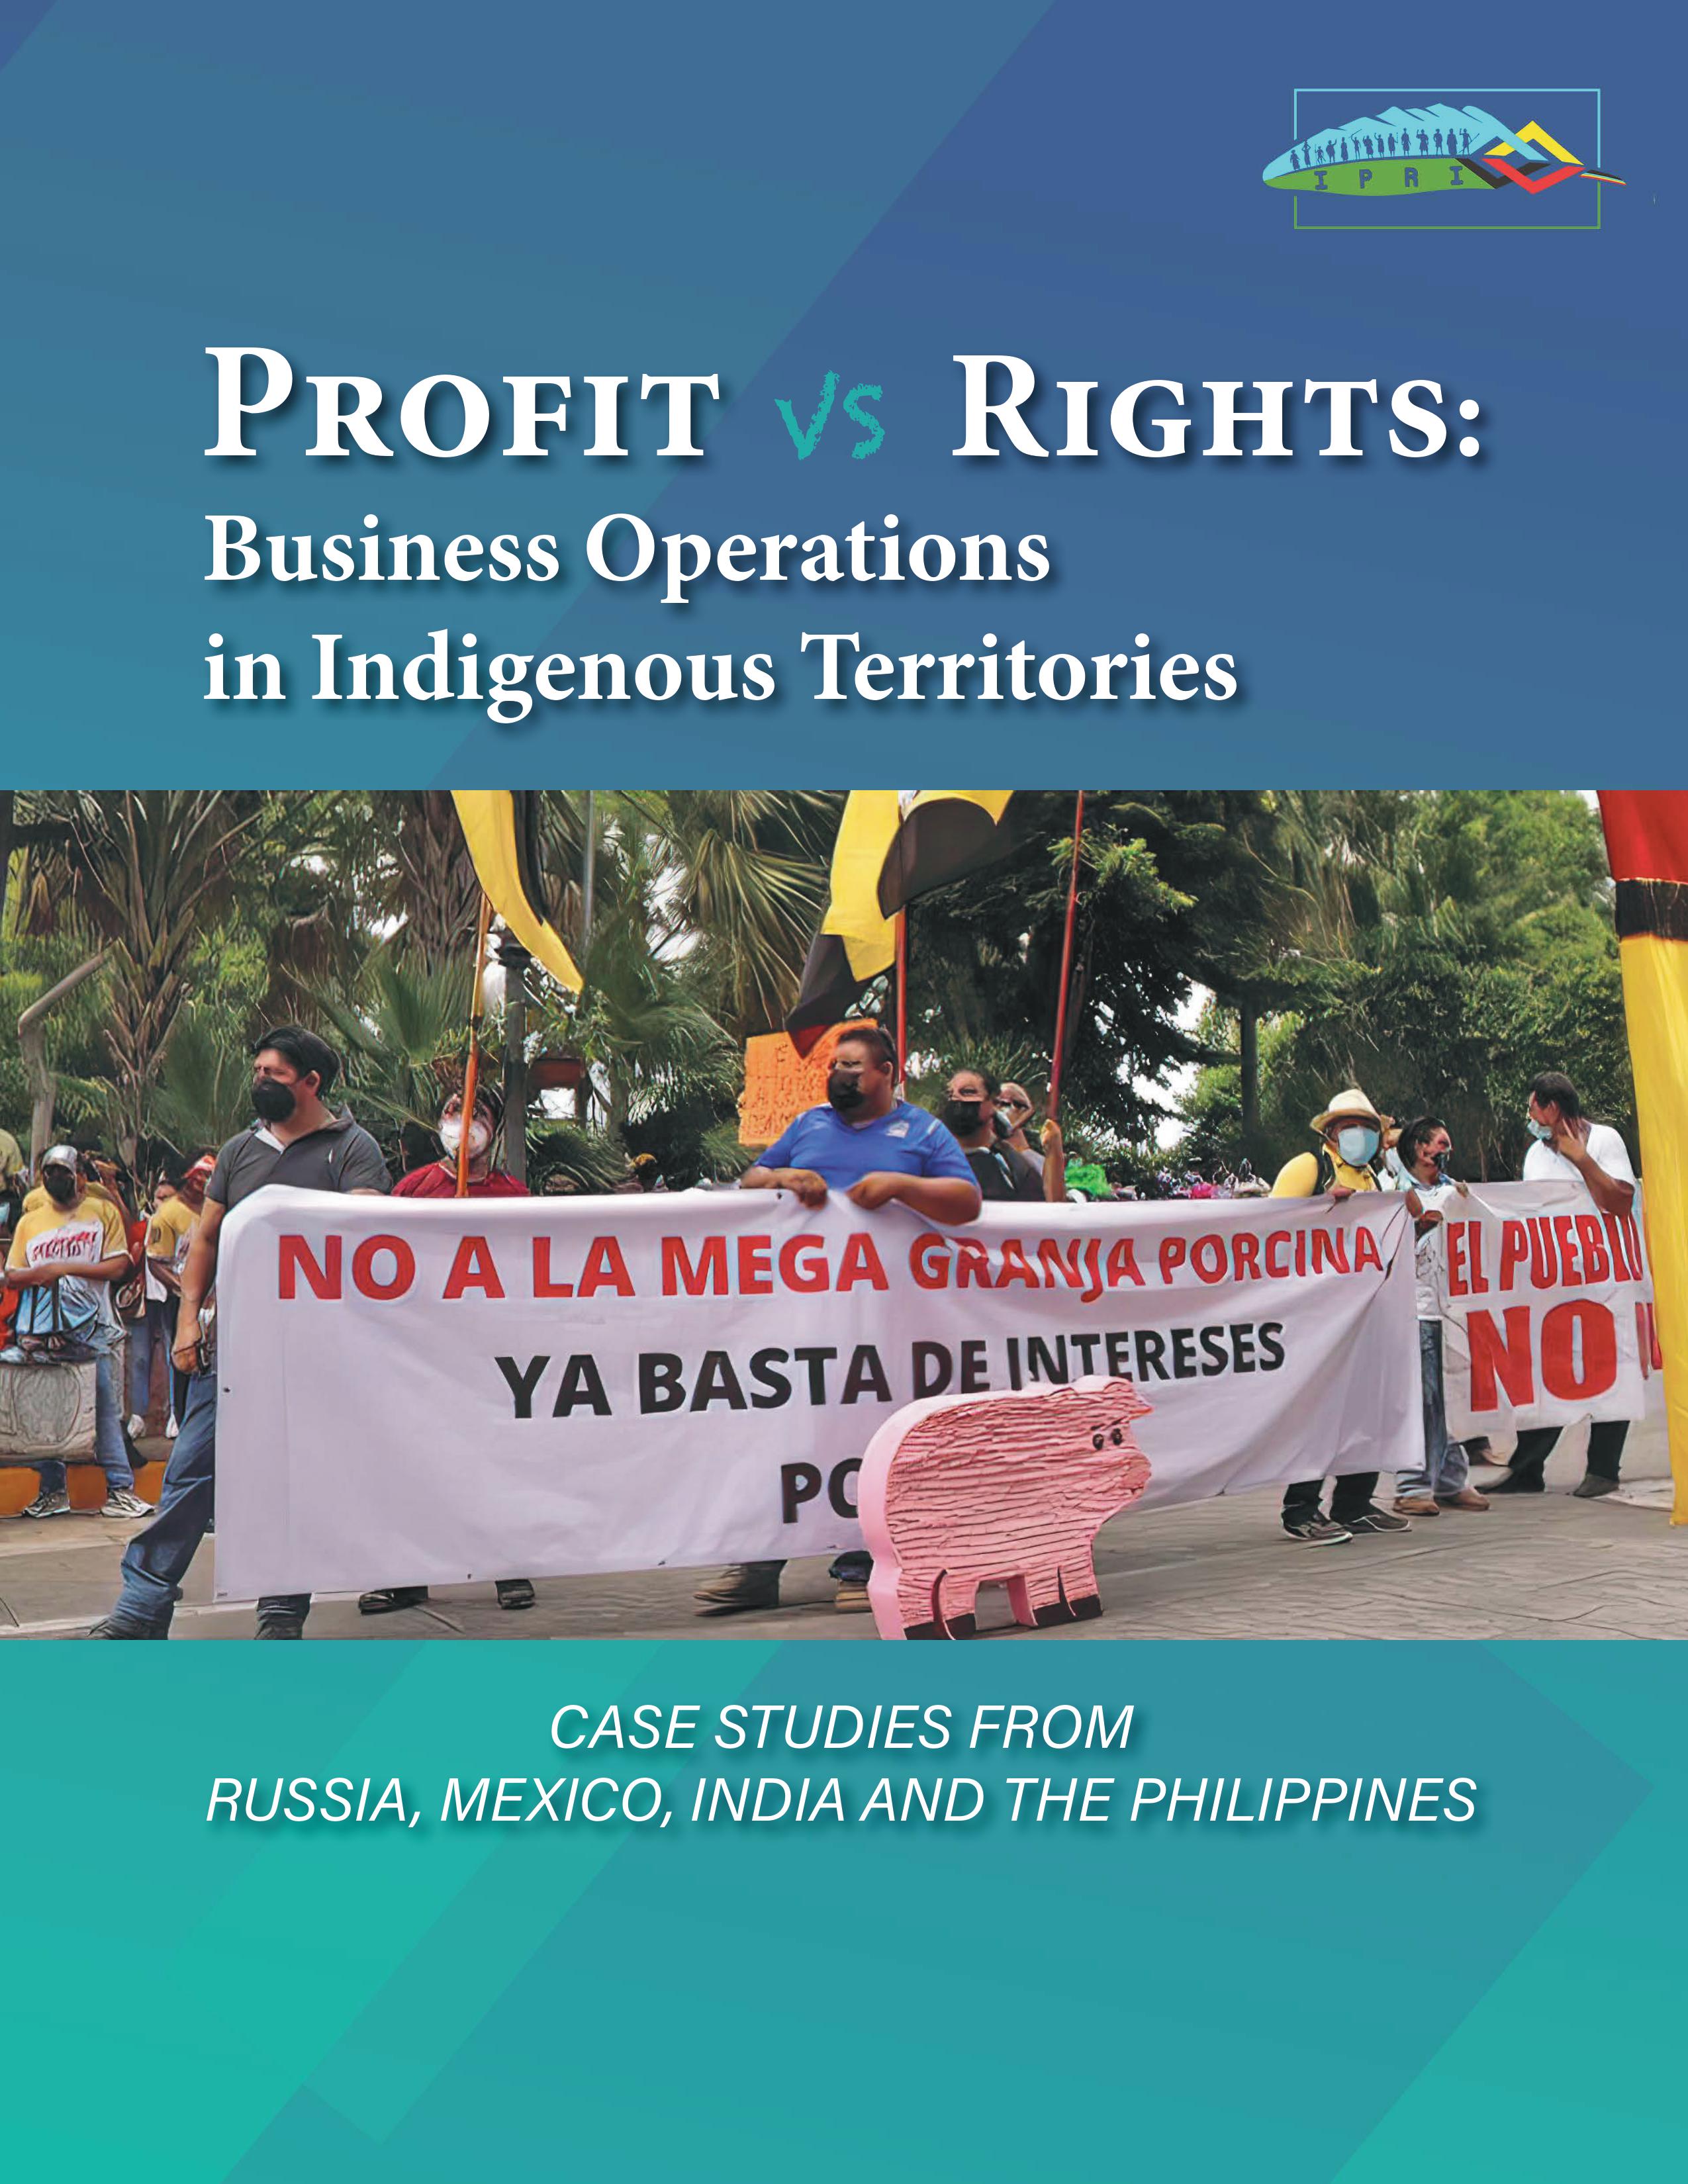 Profit%20vs%20Rights%20-%20Business%20Operations%20in%20Indigenous%20Territories.jpg